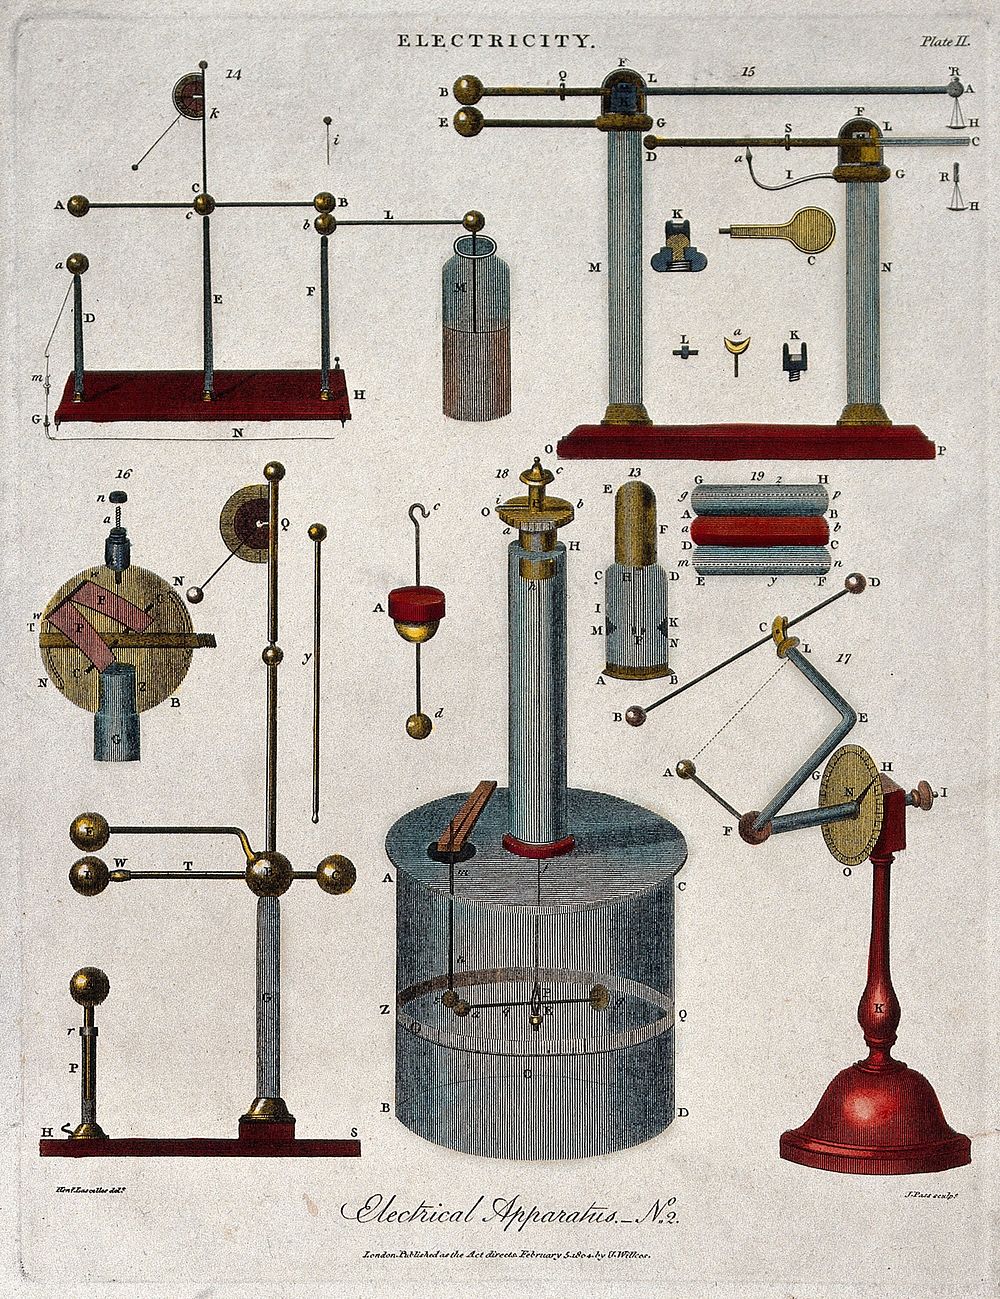 Electricity: electro-static equipment. Coloured engraving, 1804, by J. Pass.